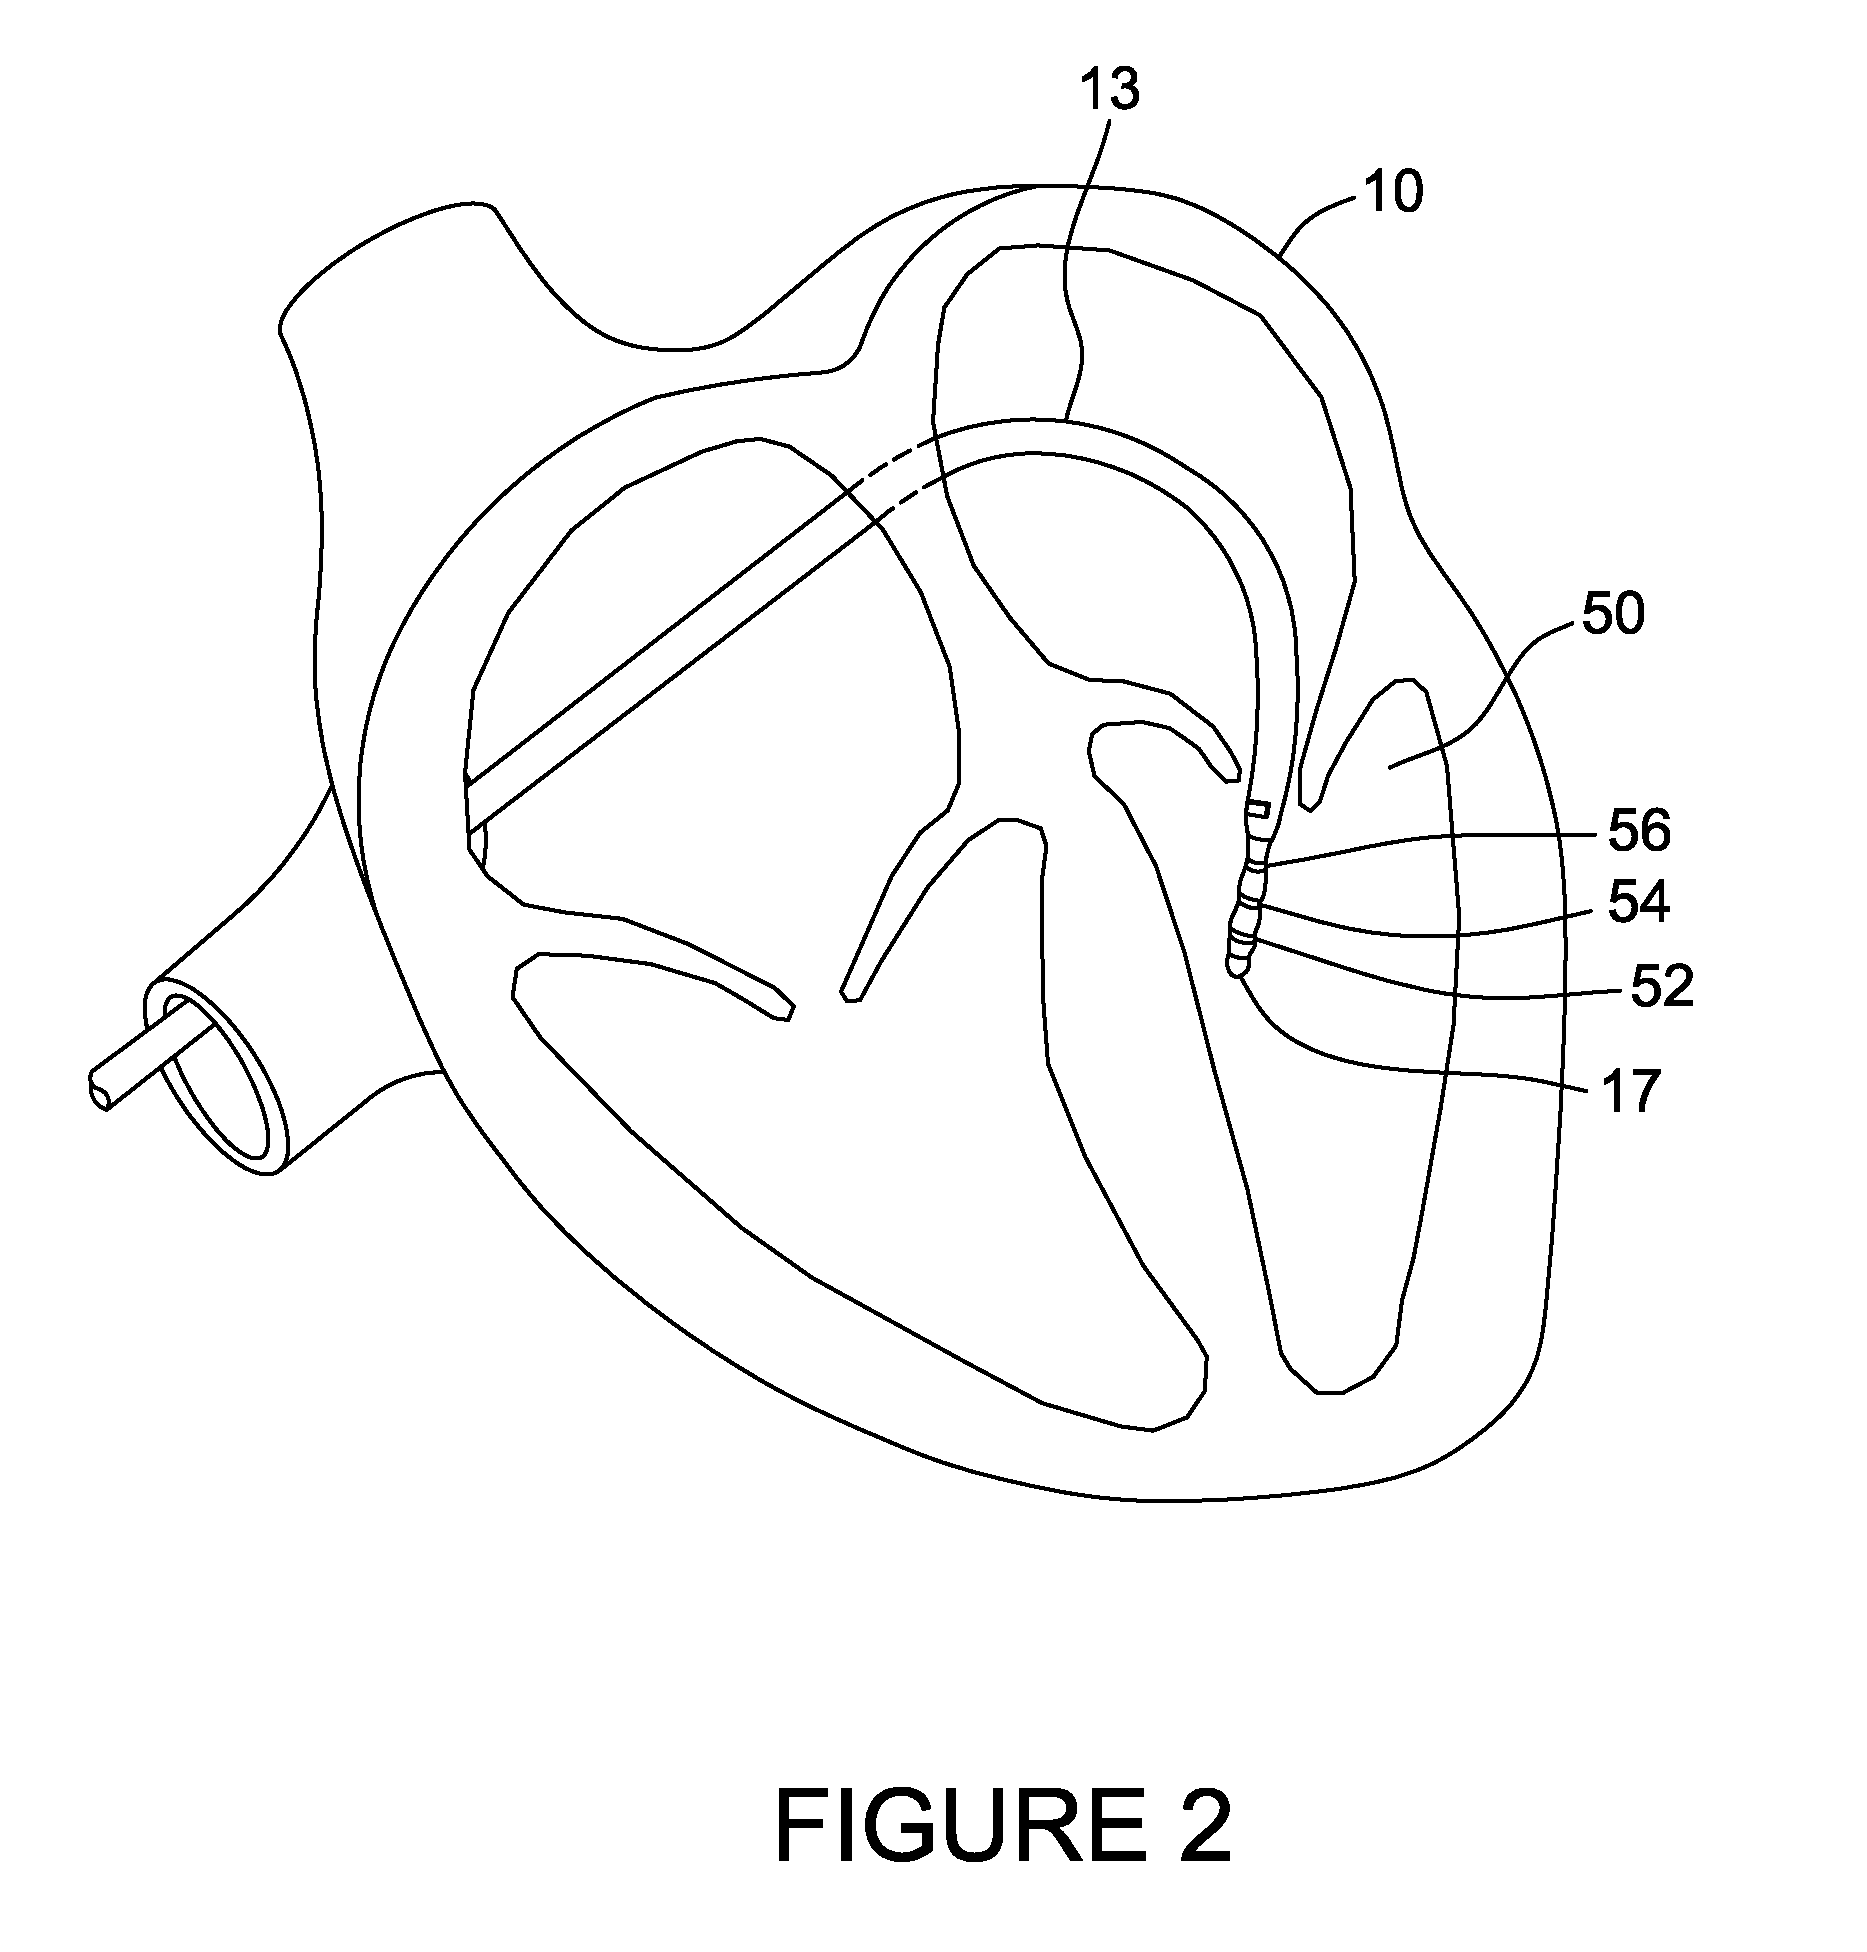 Cardiac mapping system and method for bi-directional activation detection of electrograms